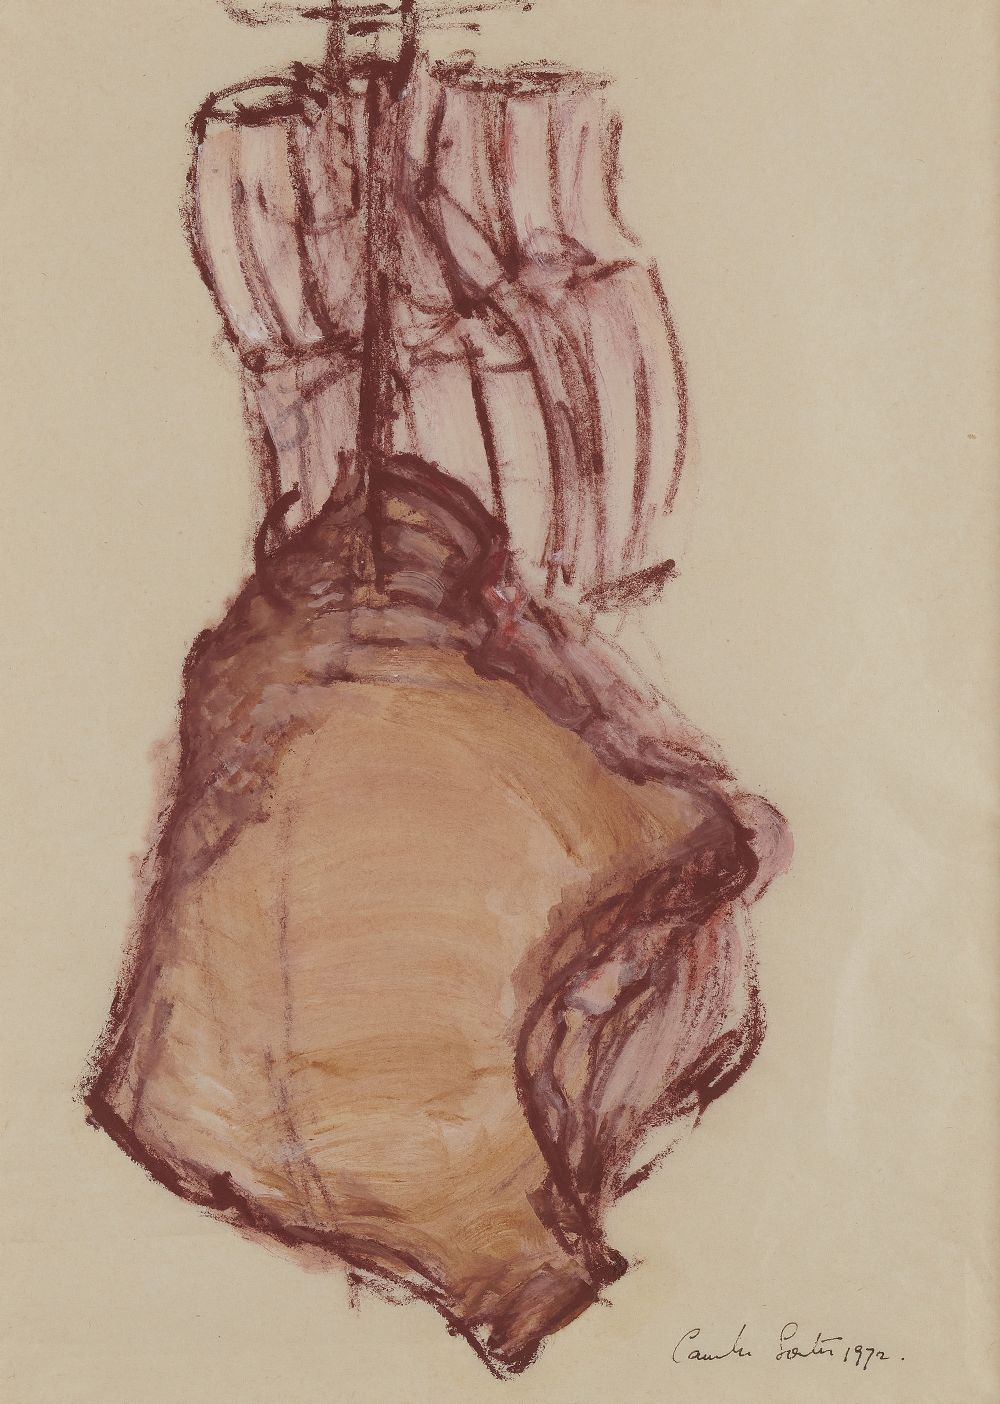 Lot 115 - HANGING MEAT (MUTTON) by Camille Souter